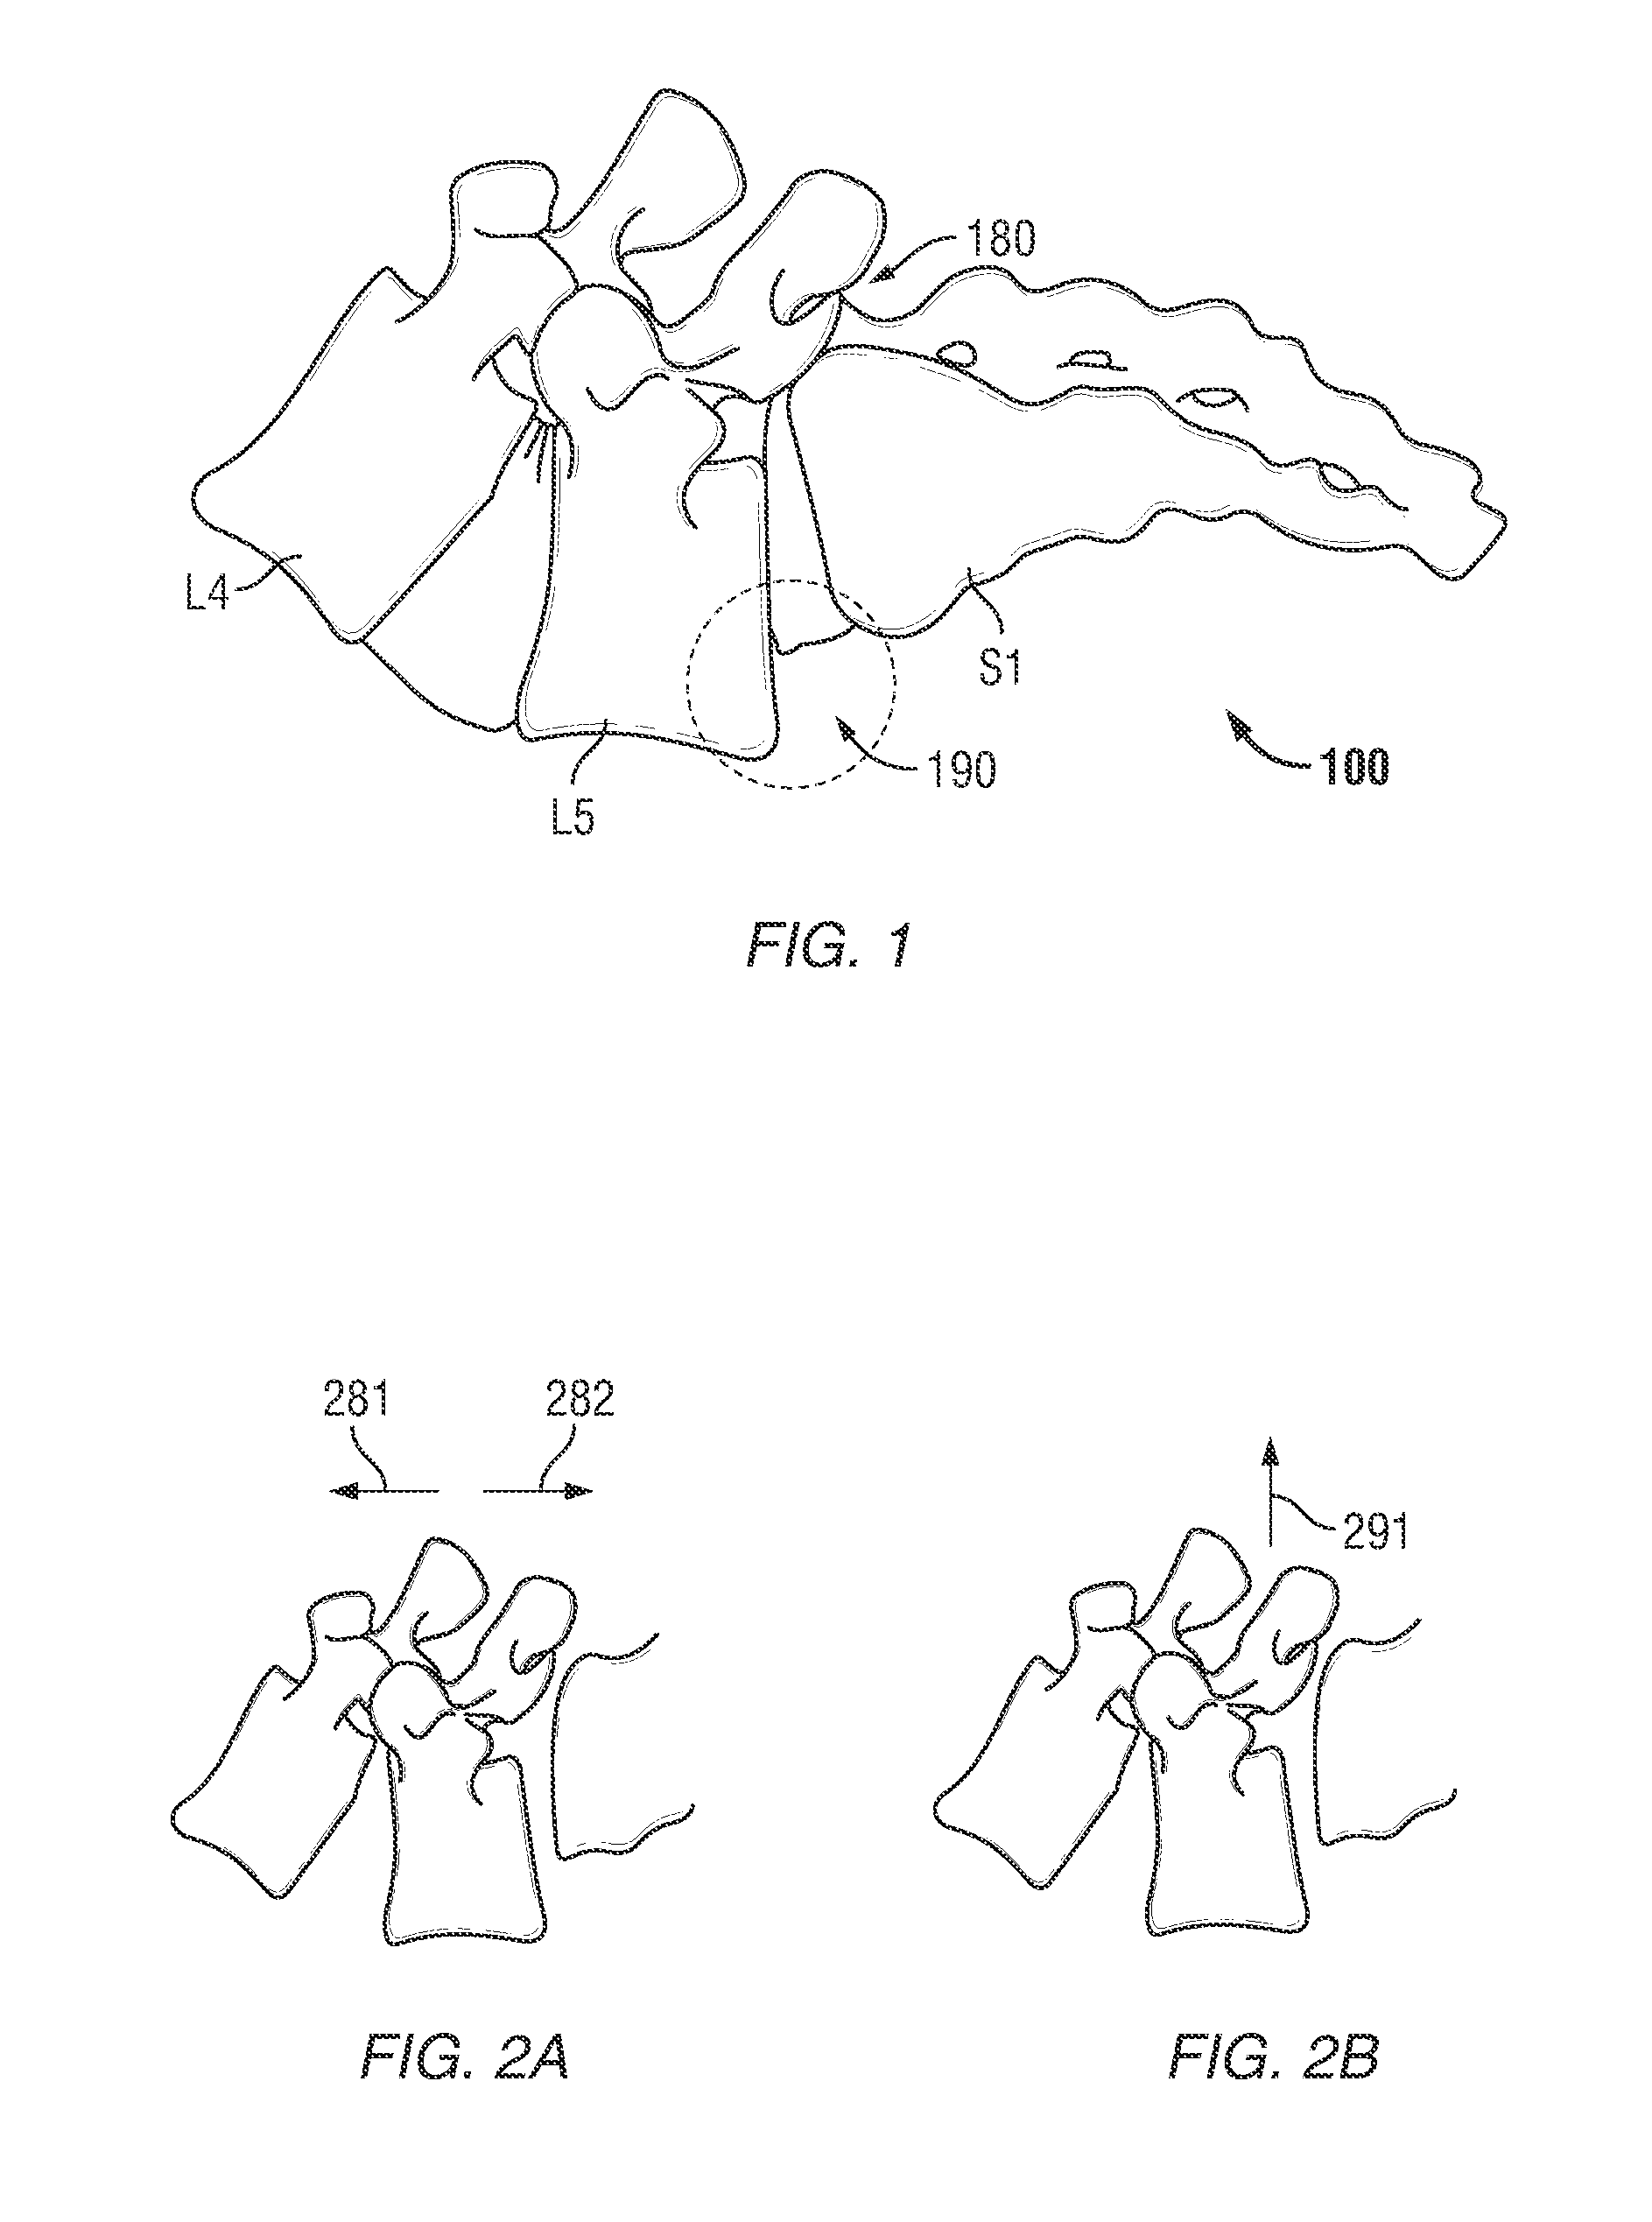 Surgical instrument with integrated compression and distraction mechanisms